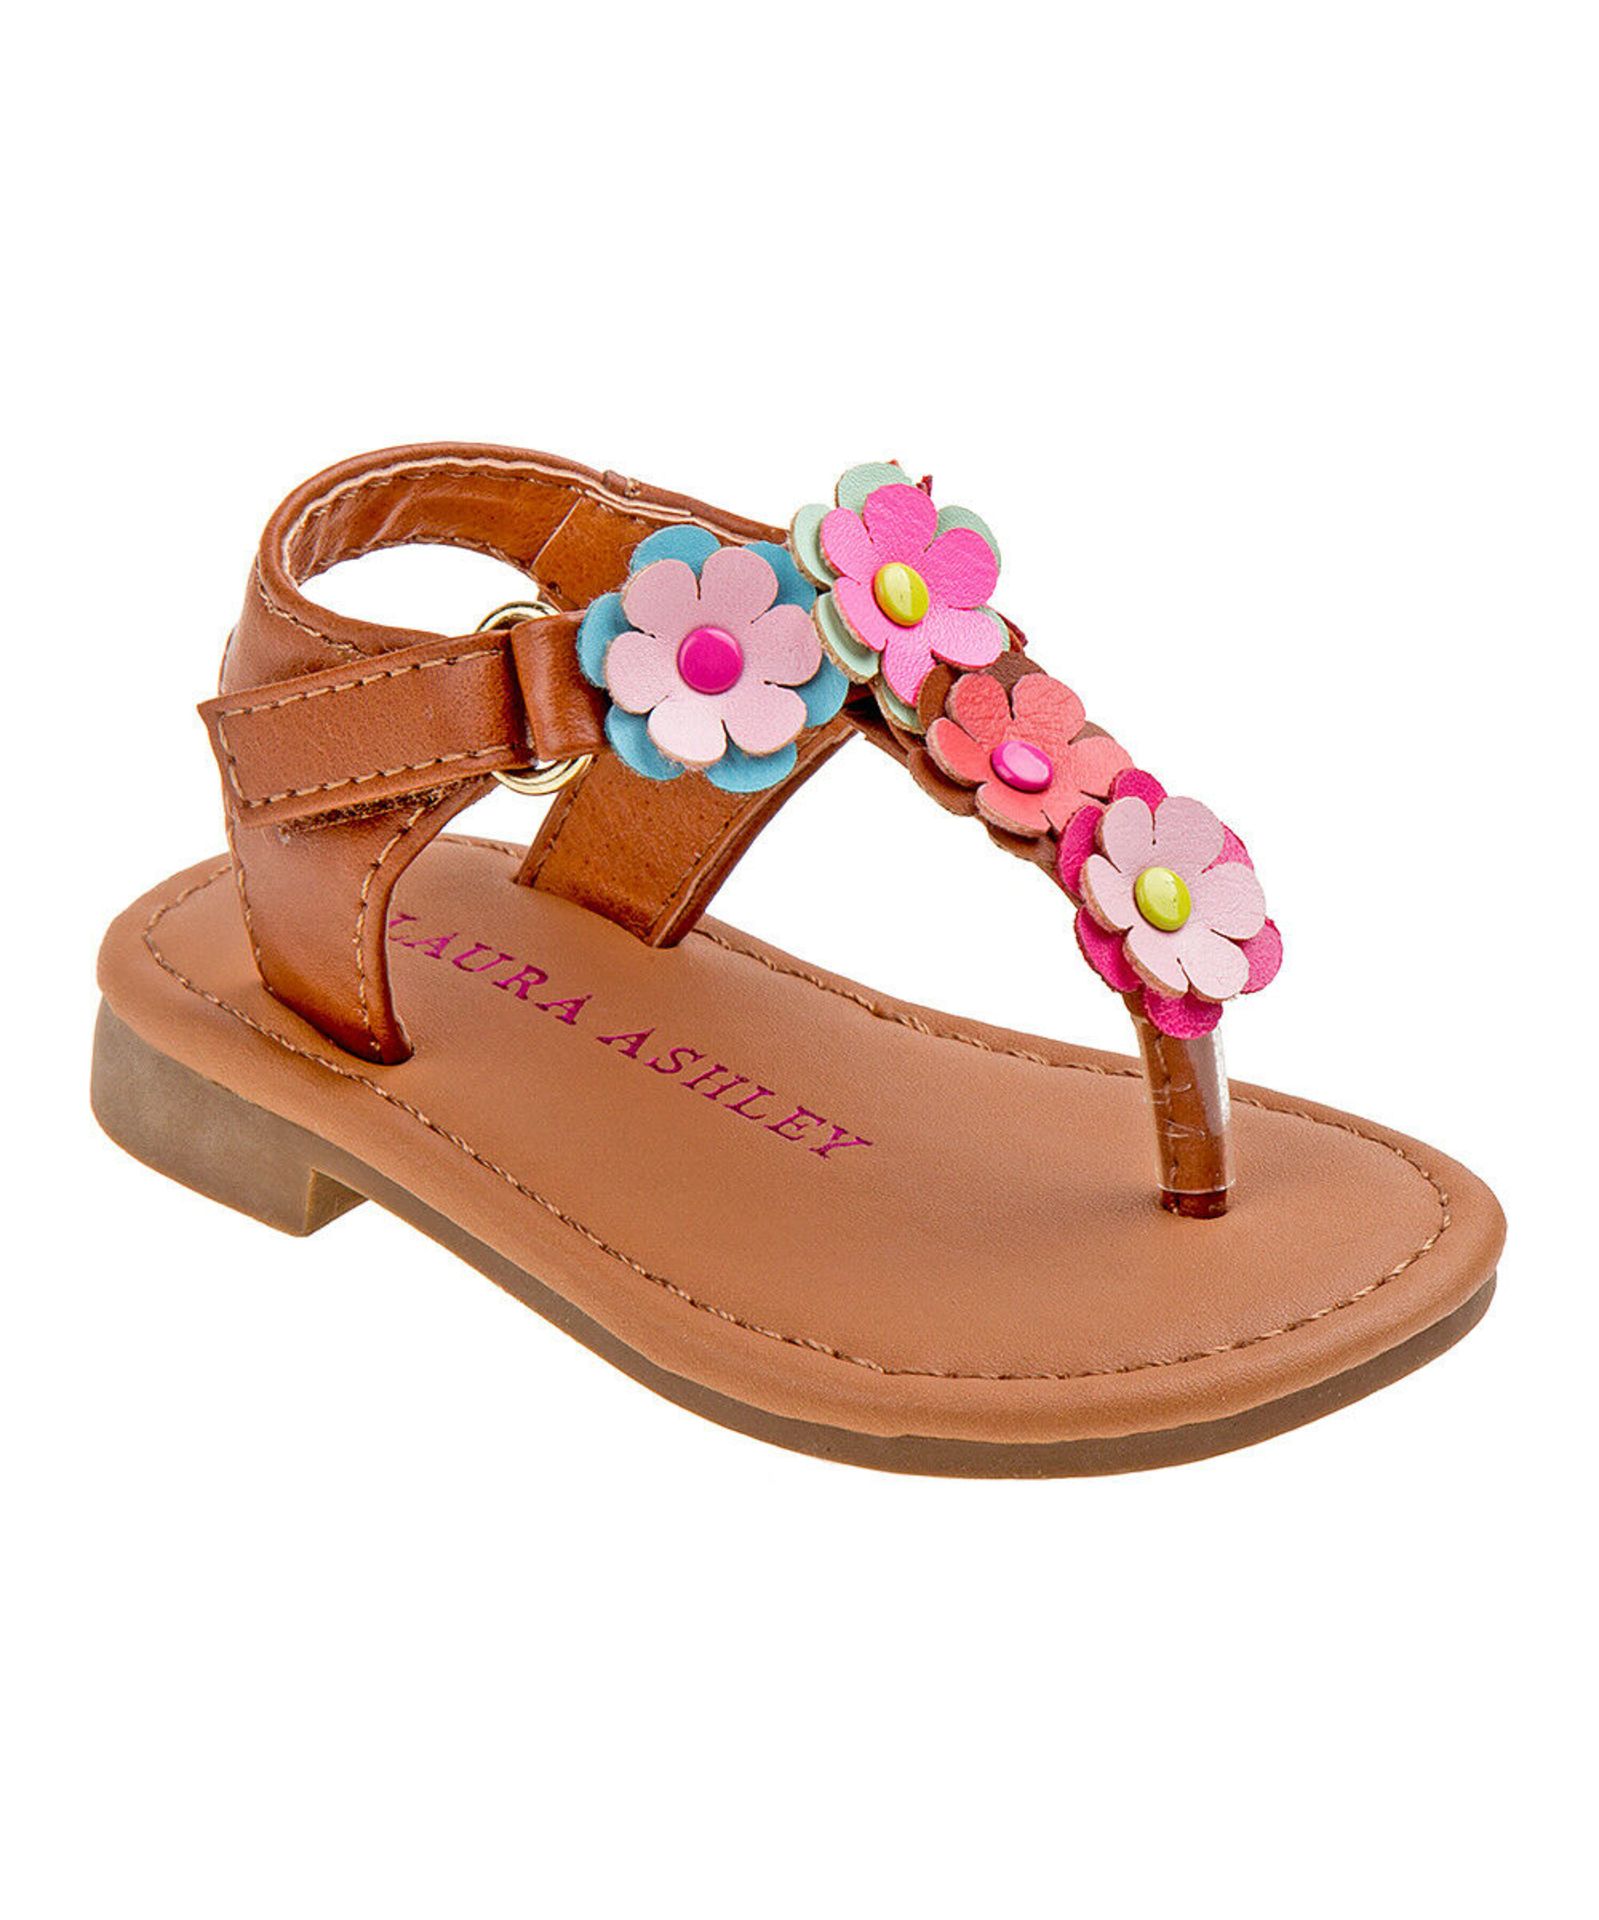 Laura Ashley® Tan Flower Sandal (Uk Size:4/Us Size:5) (New With Box) [Ref: 54874004]